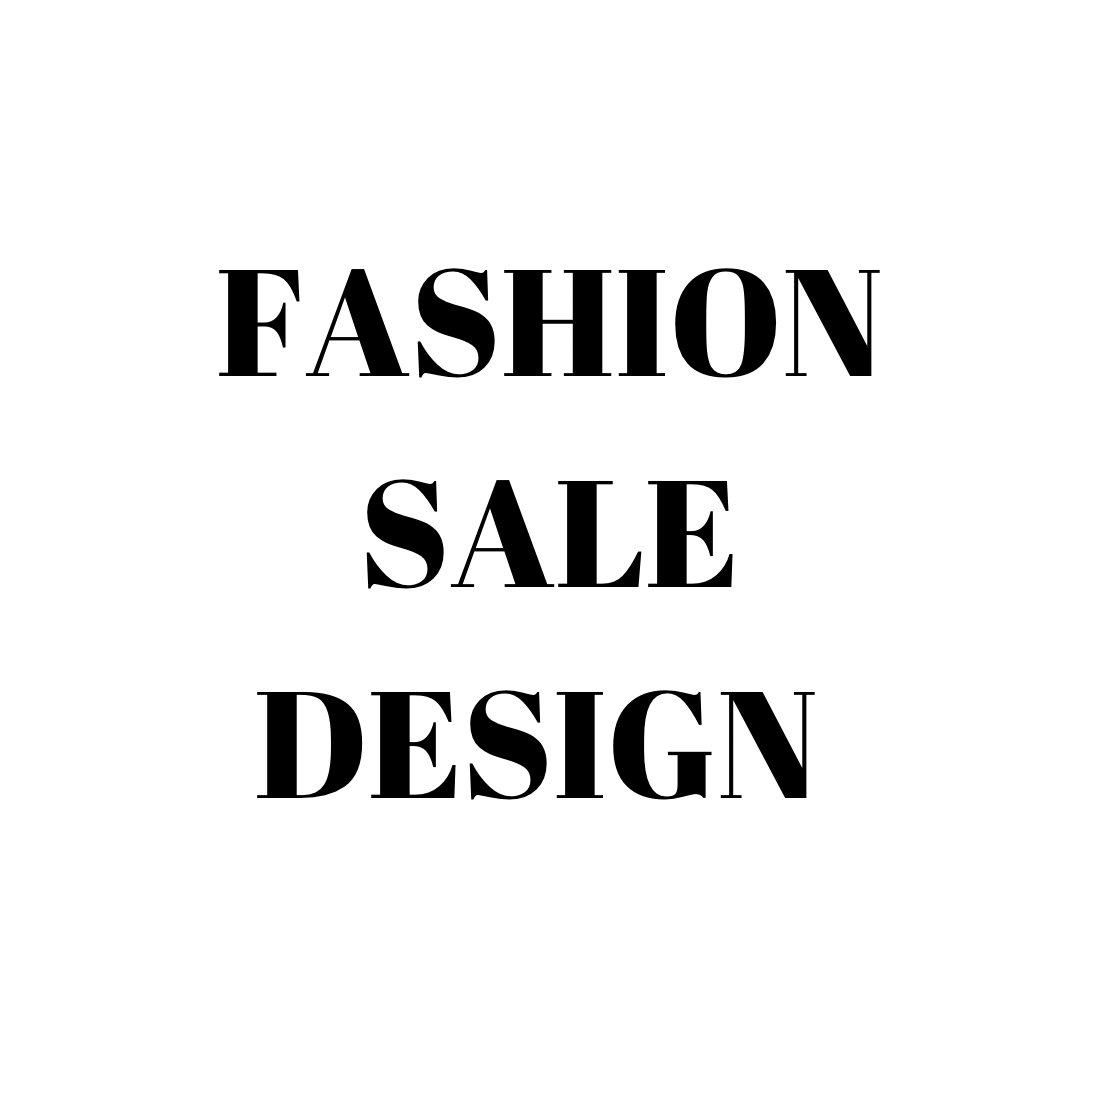 Fashion sale design for social media/ instagram post template preview image.